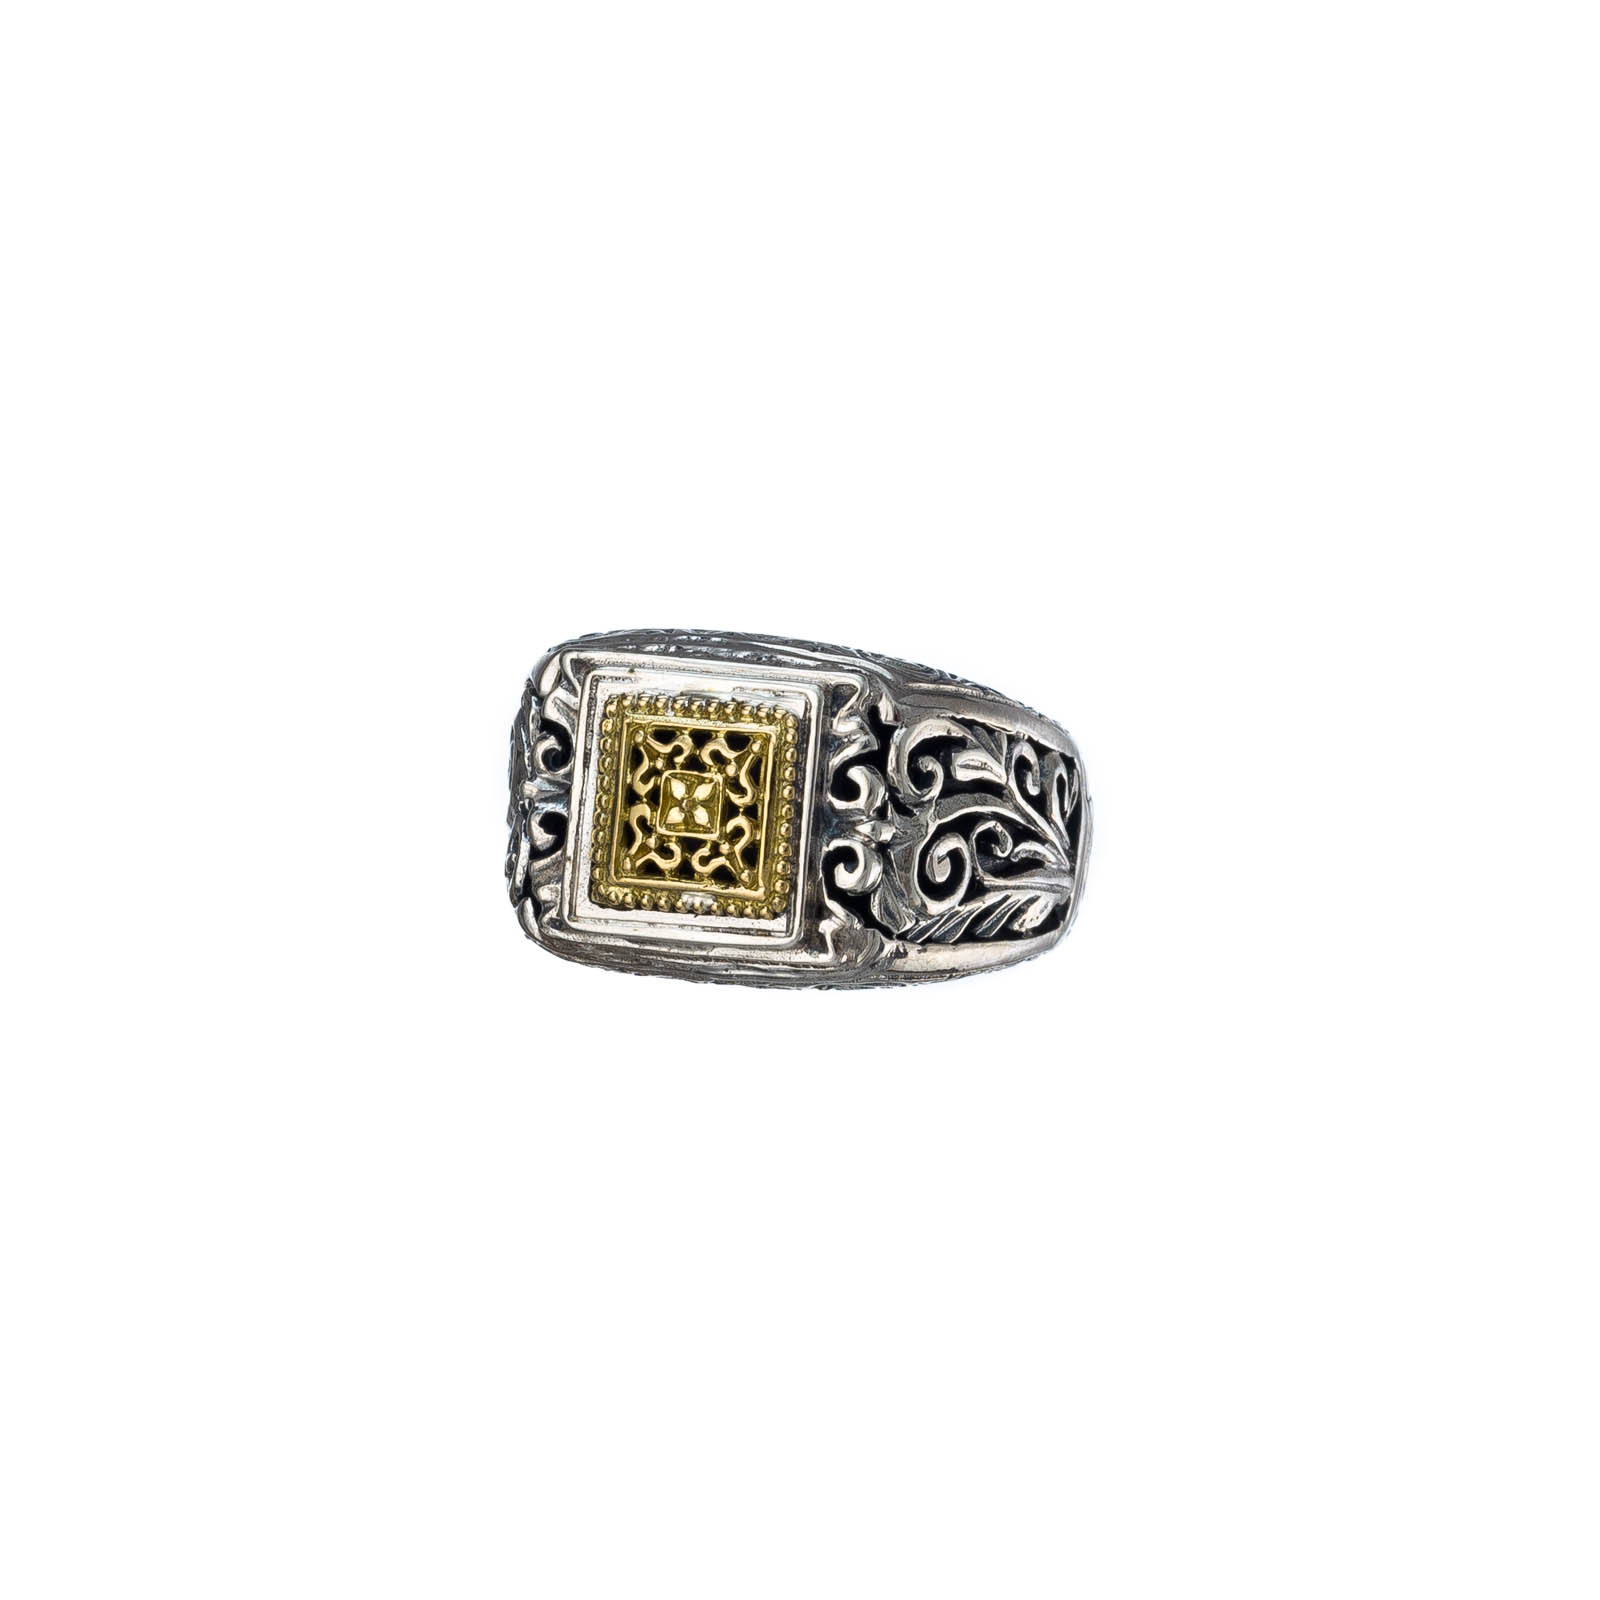 Byzantine ring in 18K Gold and sterling silver